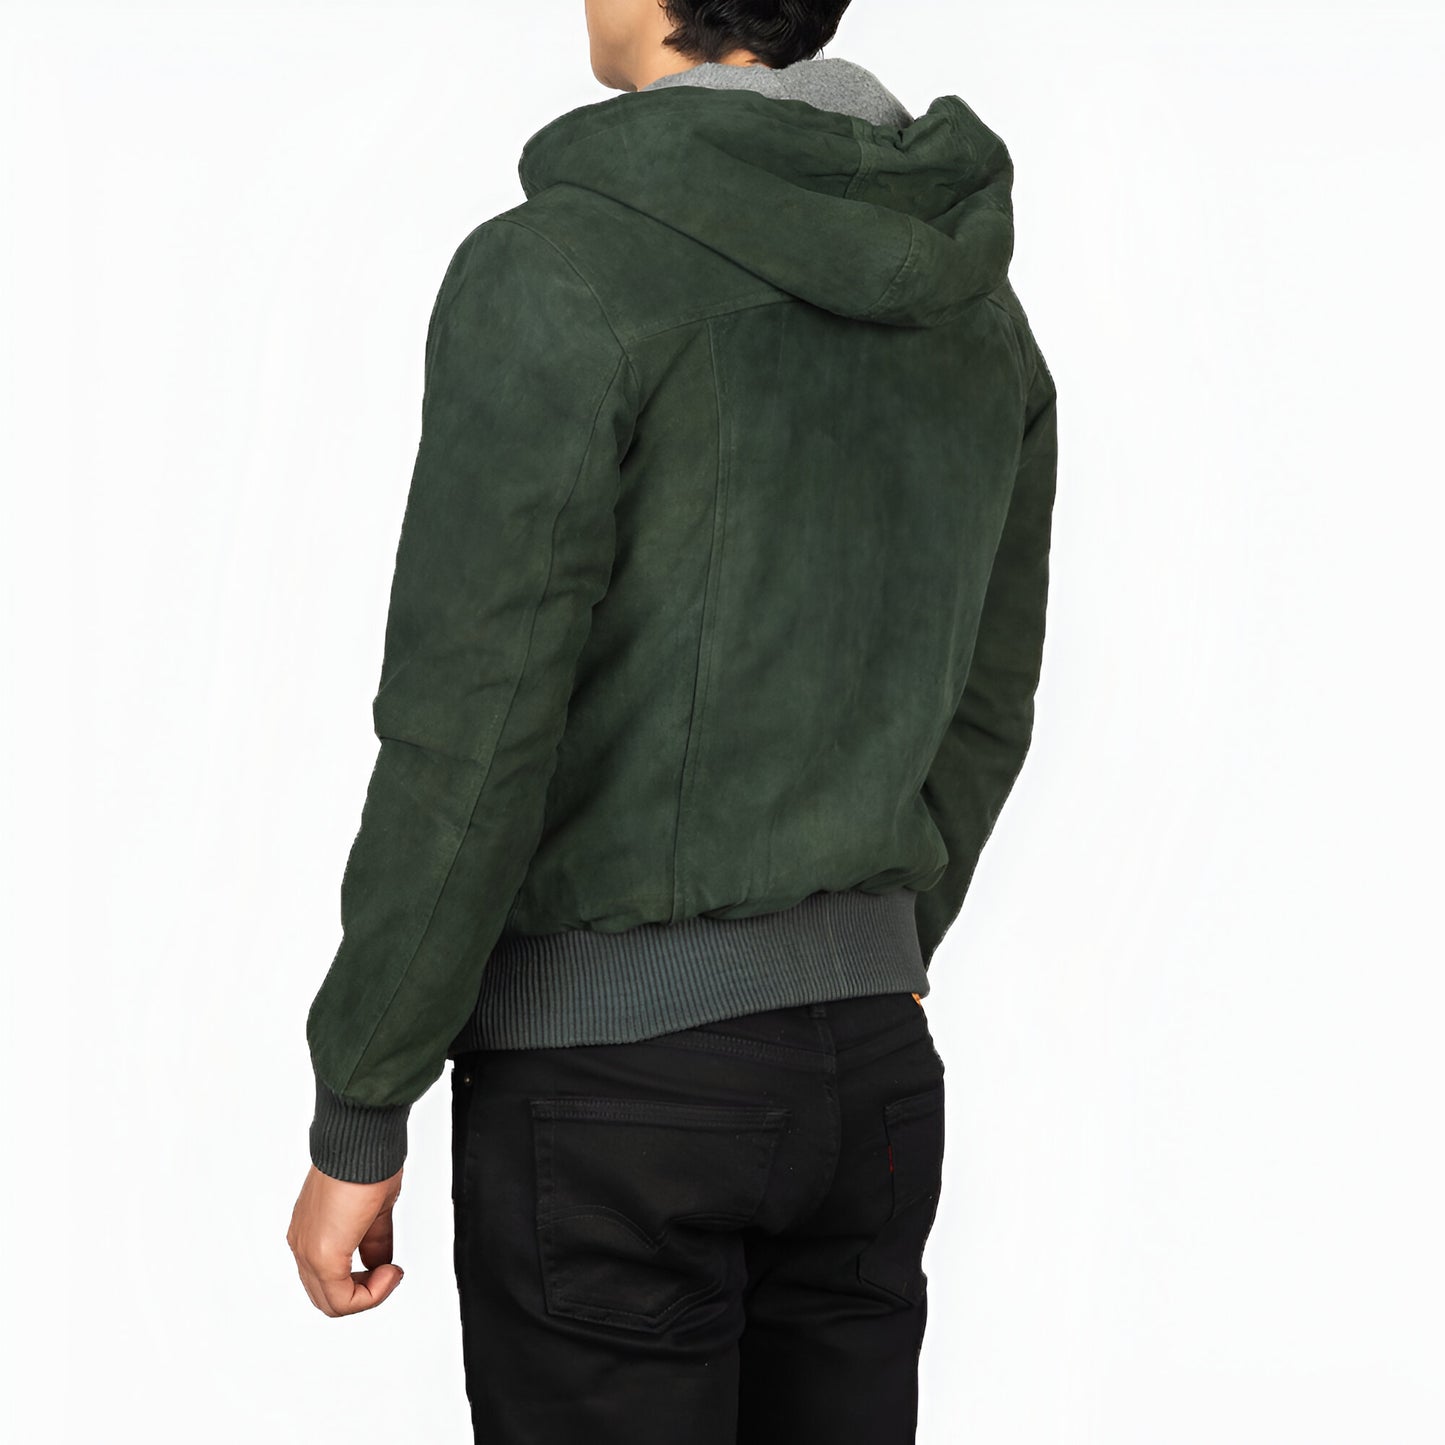 Dicks Leather Green Hooded Suede Bomber Jacket